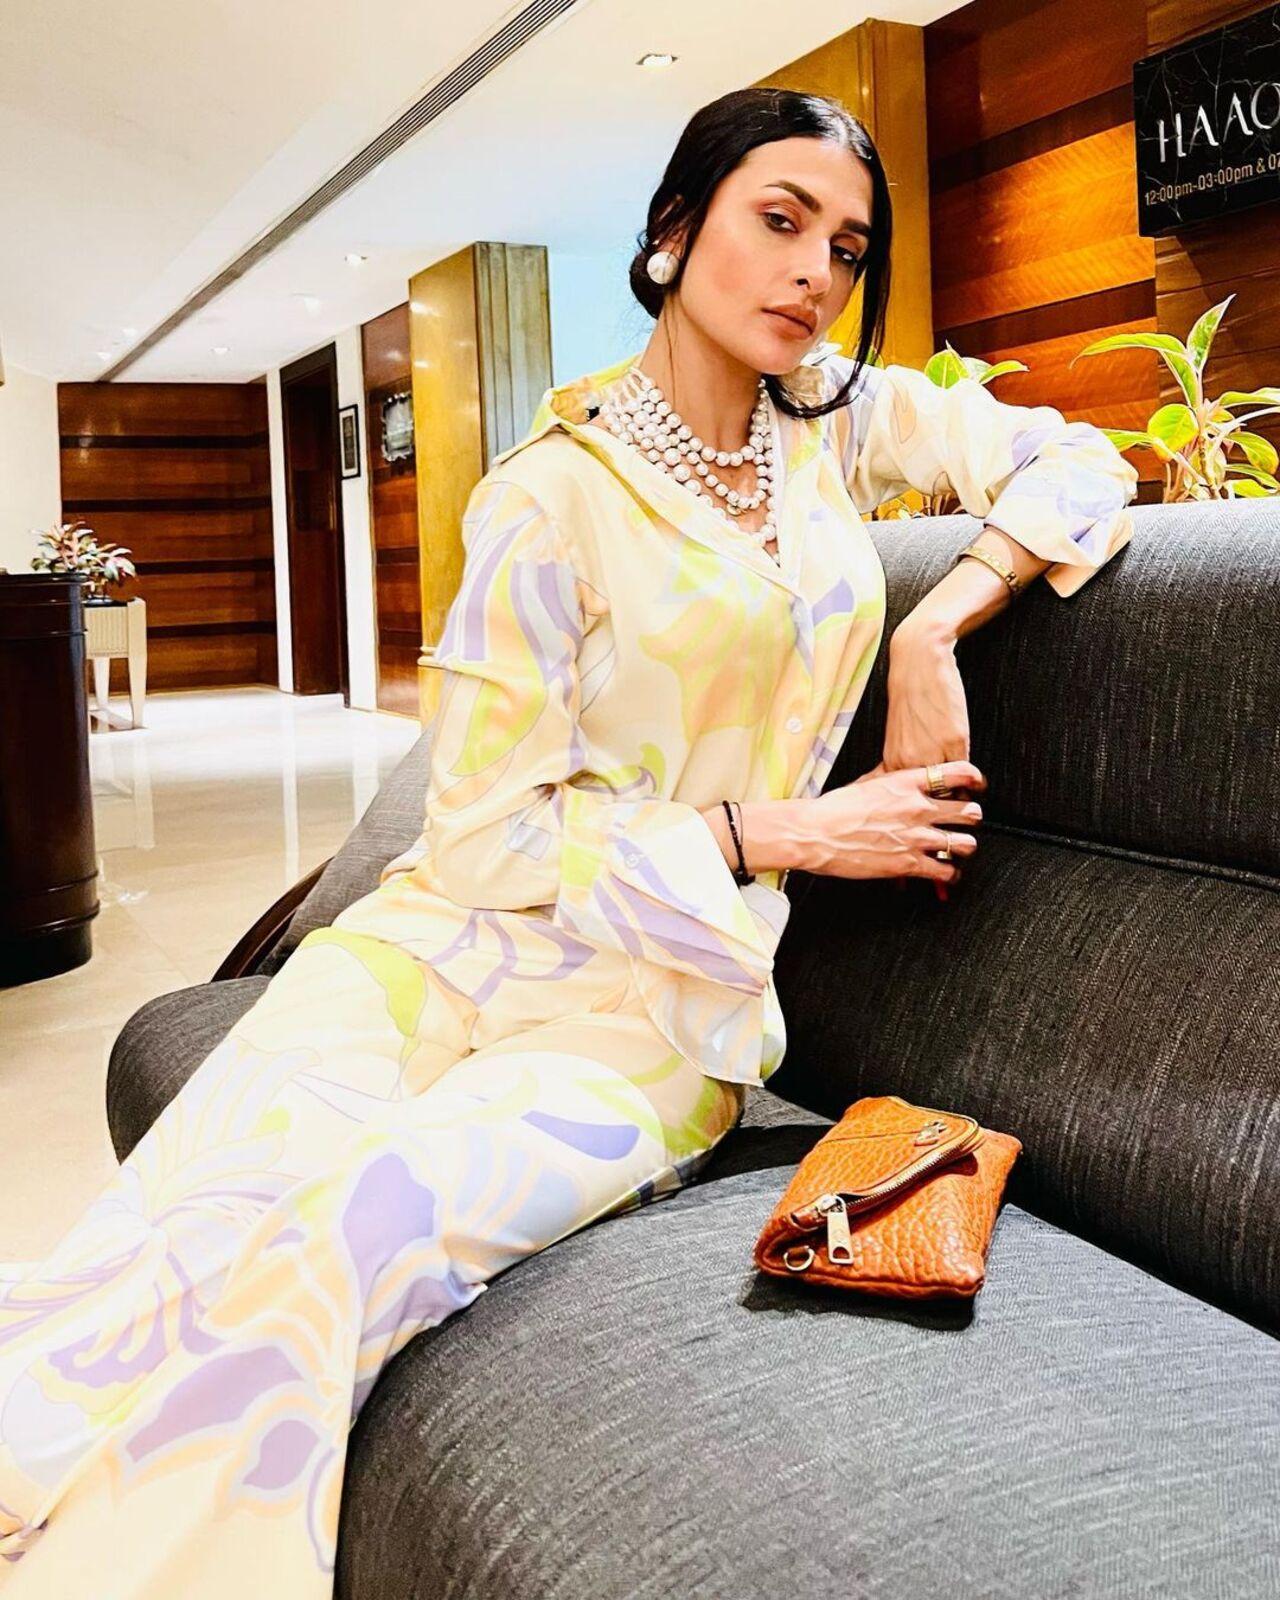 Are you a morning person? No worries, we have a stunning dress for your beautiful birthday breakfast. Pavitra Punia's light yellow co-ord set is something that can perfectly complement your morning vibes